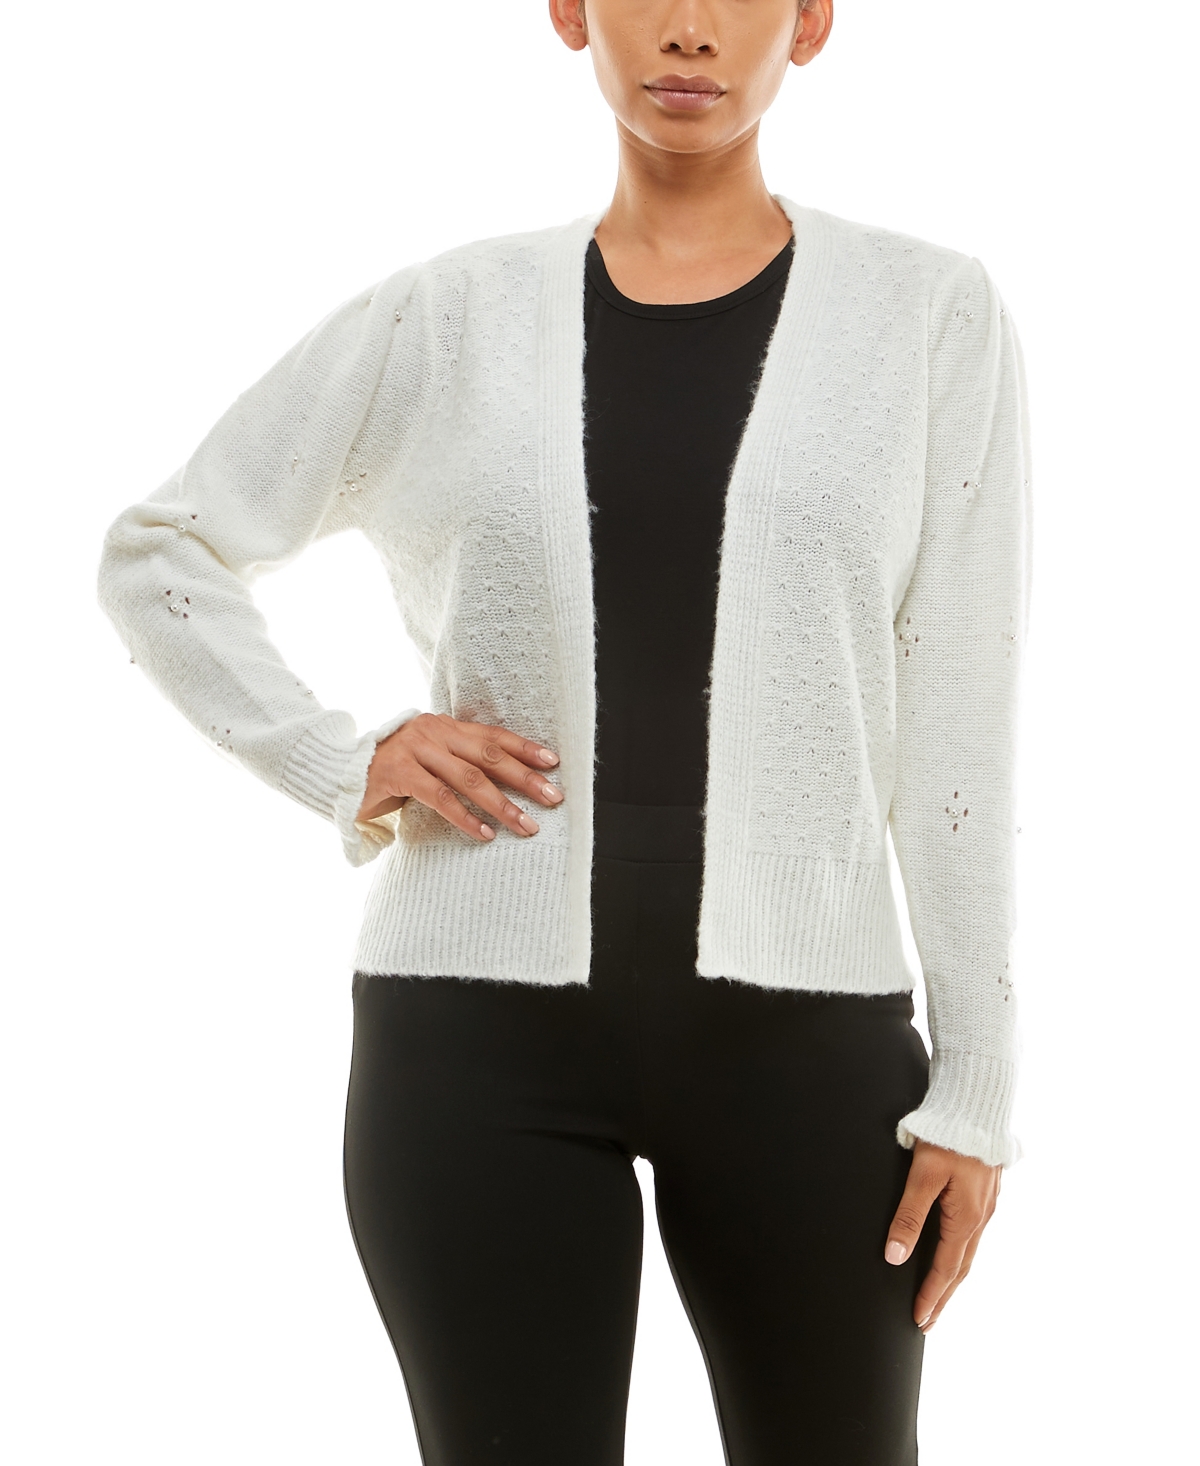 Adrienne Vittadini Women's Long Sleeve Novelty Stitch Front Sweater Cardigan With Imitation-pearls In Gardenia